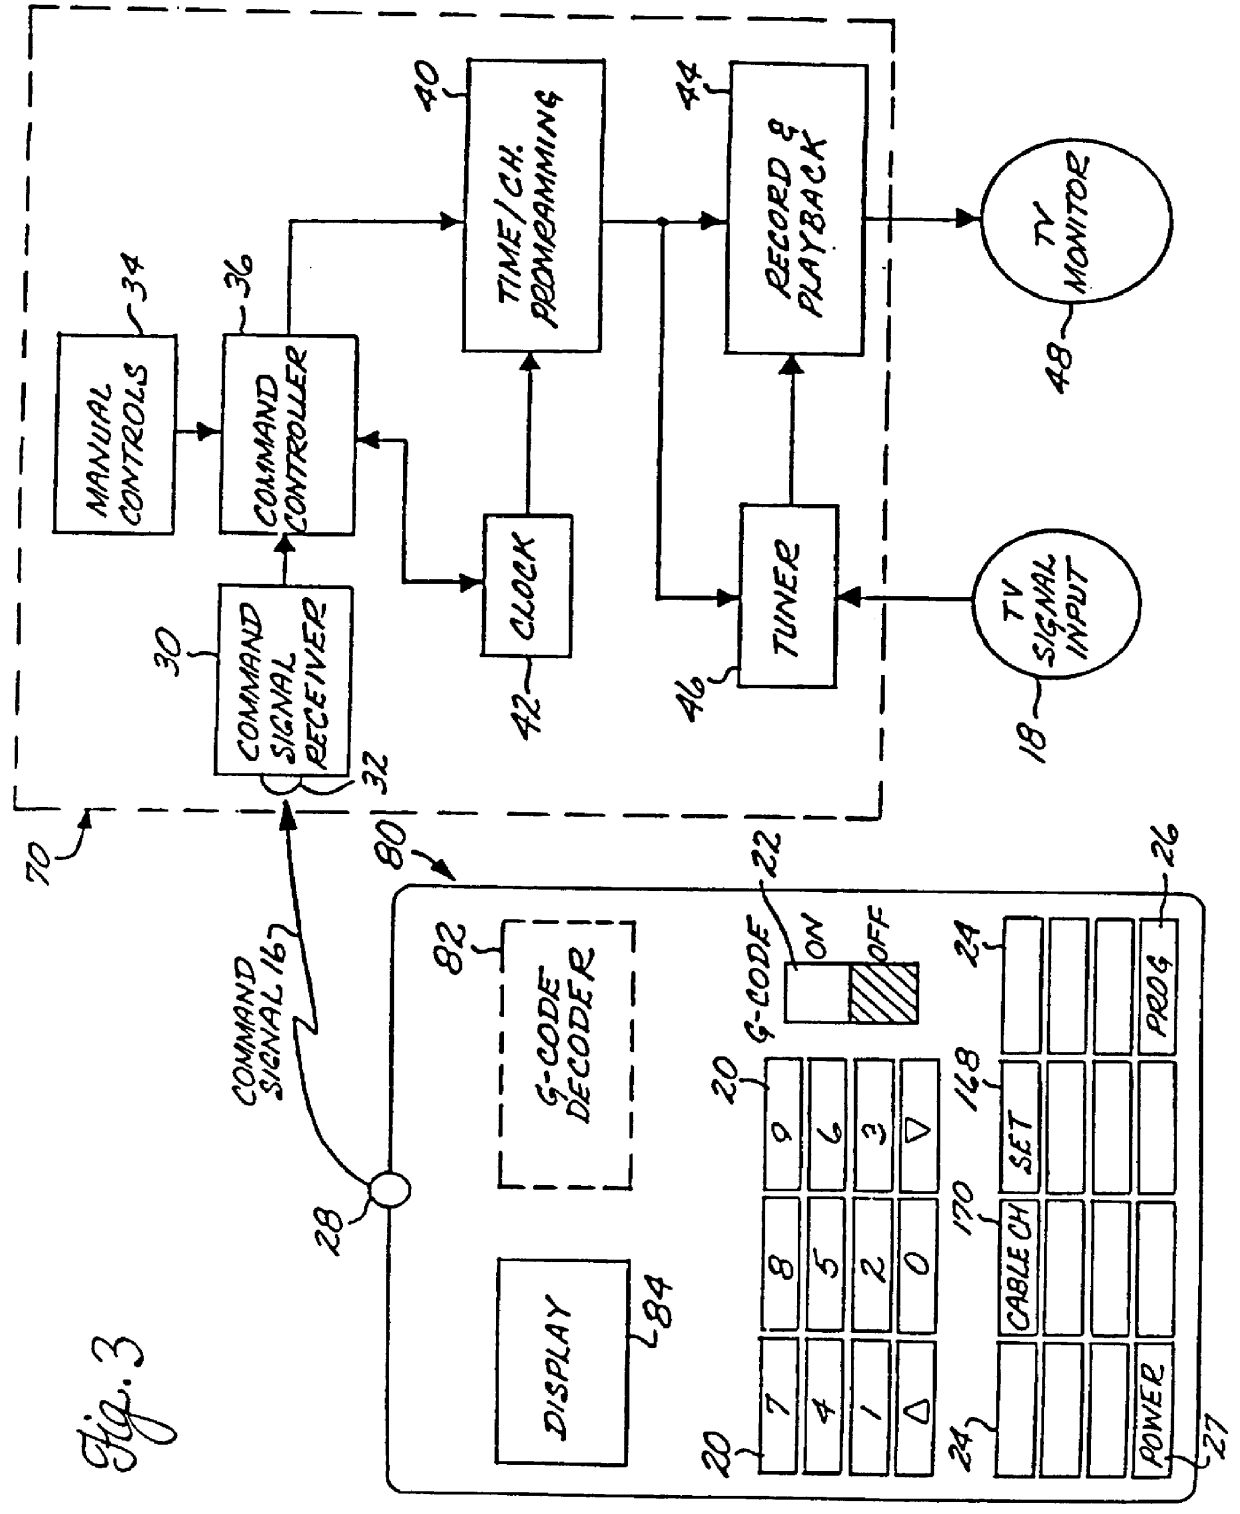 Apparatus and method using compressed codes for recorder preprogramming